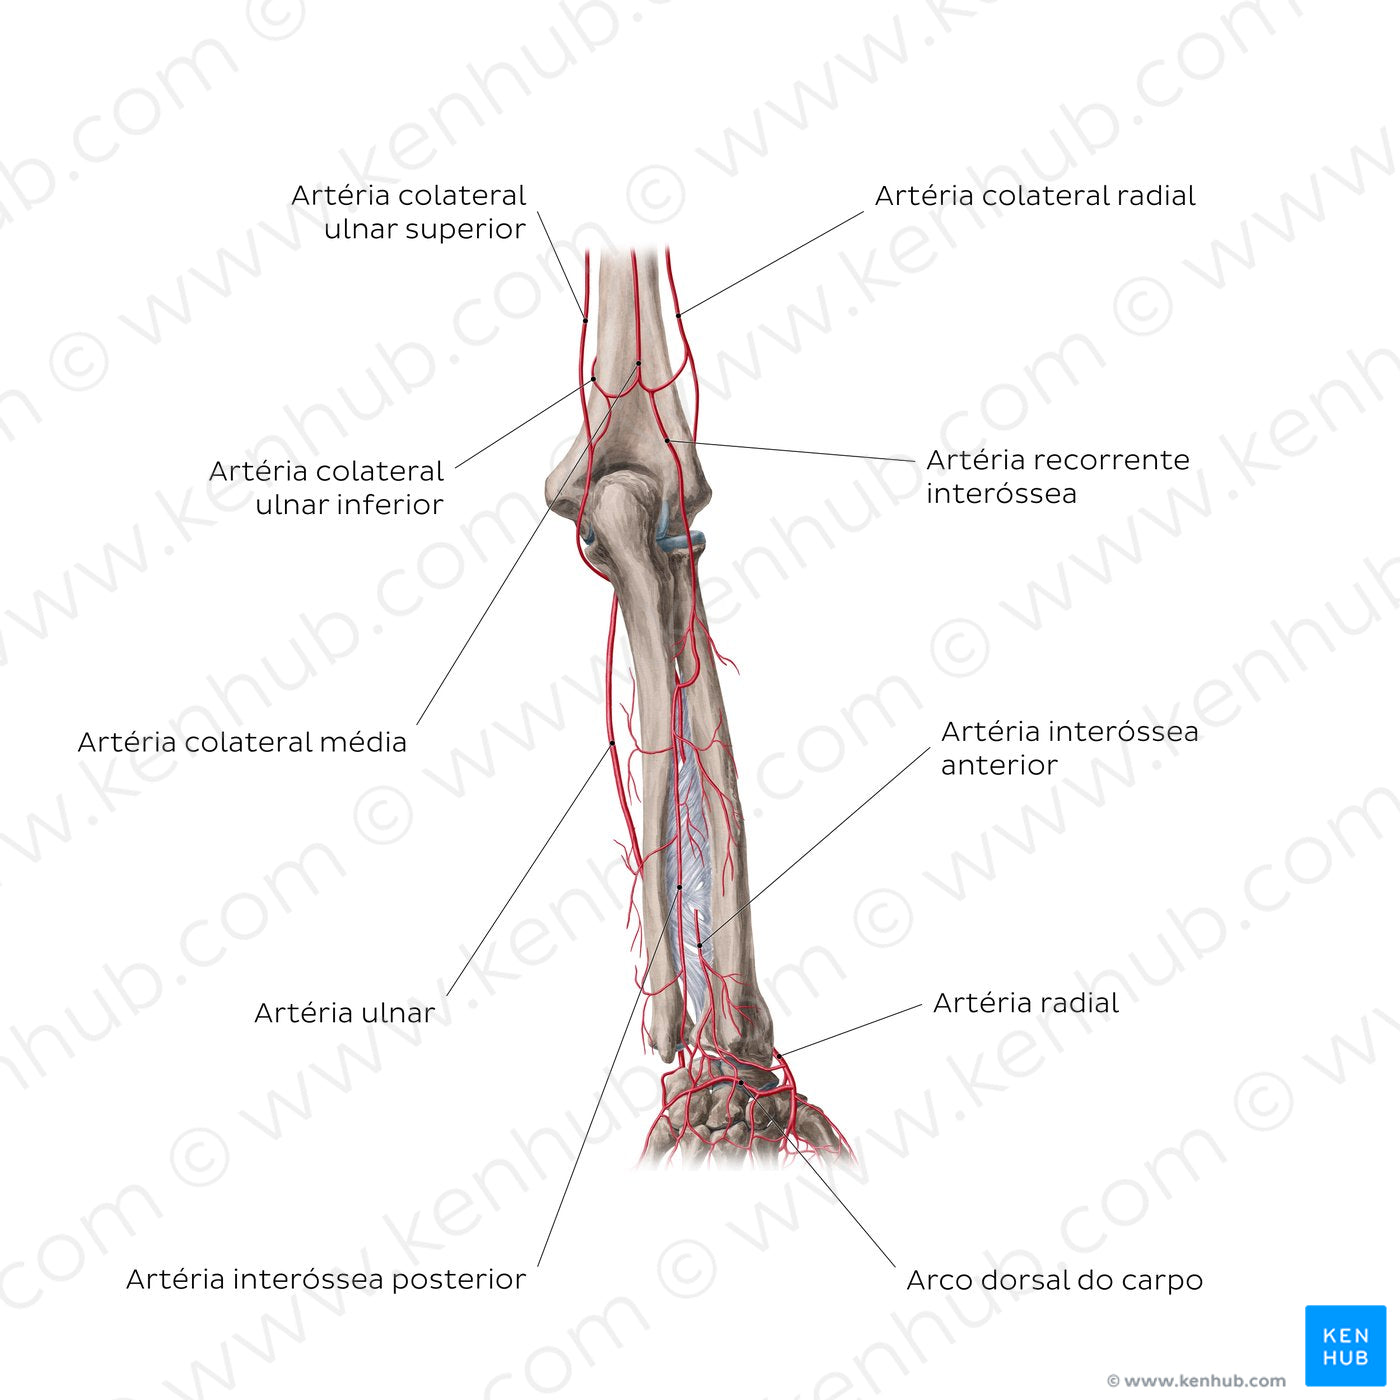 Arteries of the forearm: Posterior view (Portuguese)